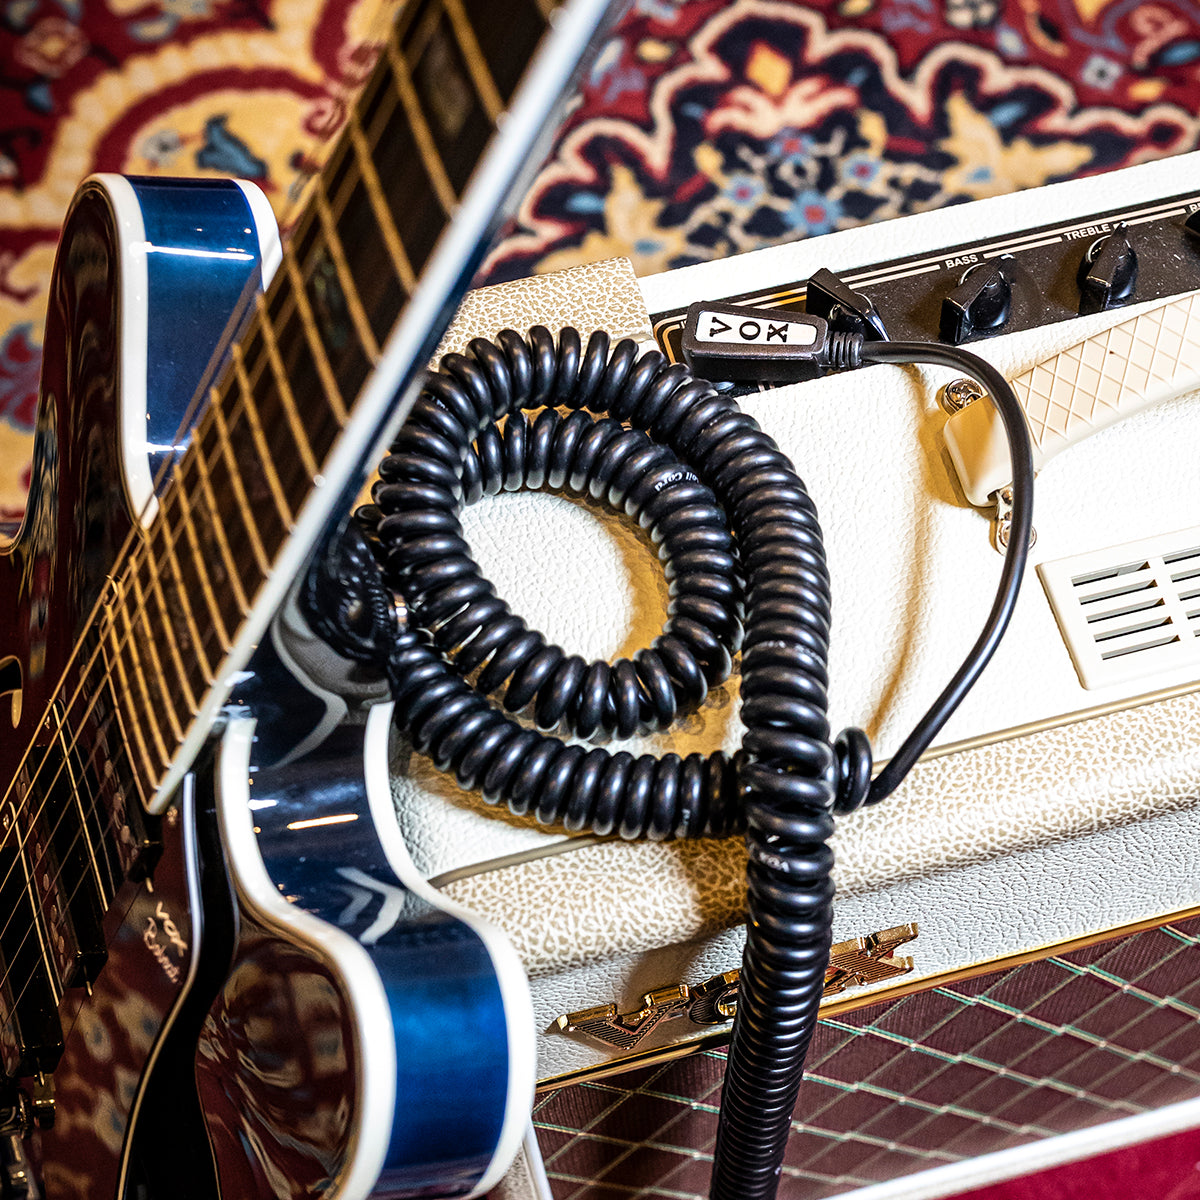 Vintage Coil Cable plugged in a VOX amplifier and blue electric guitar